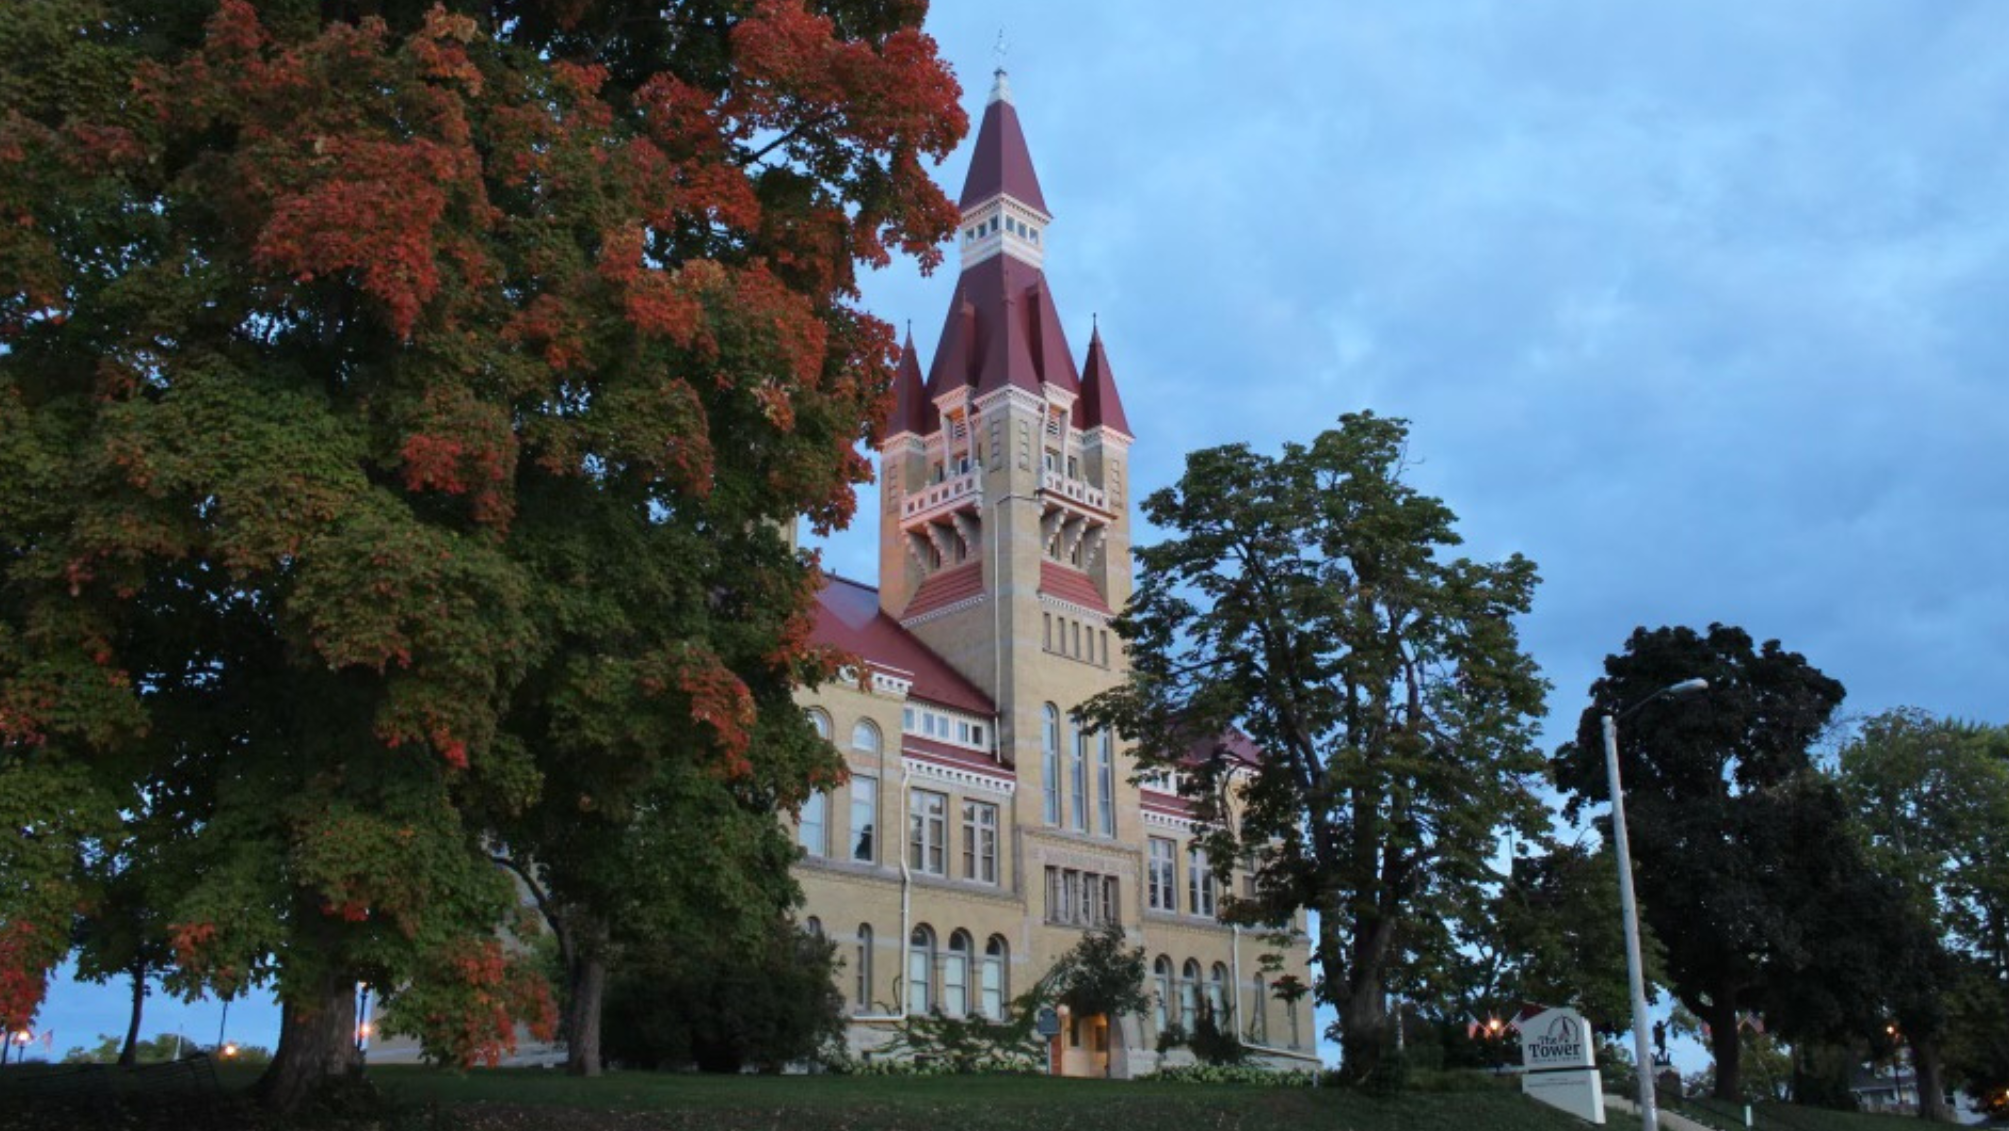 1889 Courthouse with The Tower Heritage Center